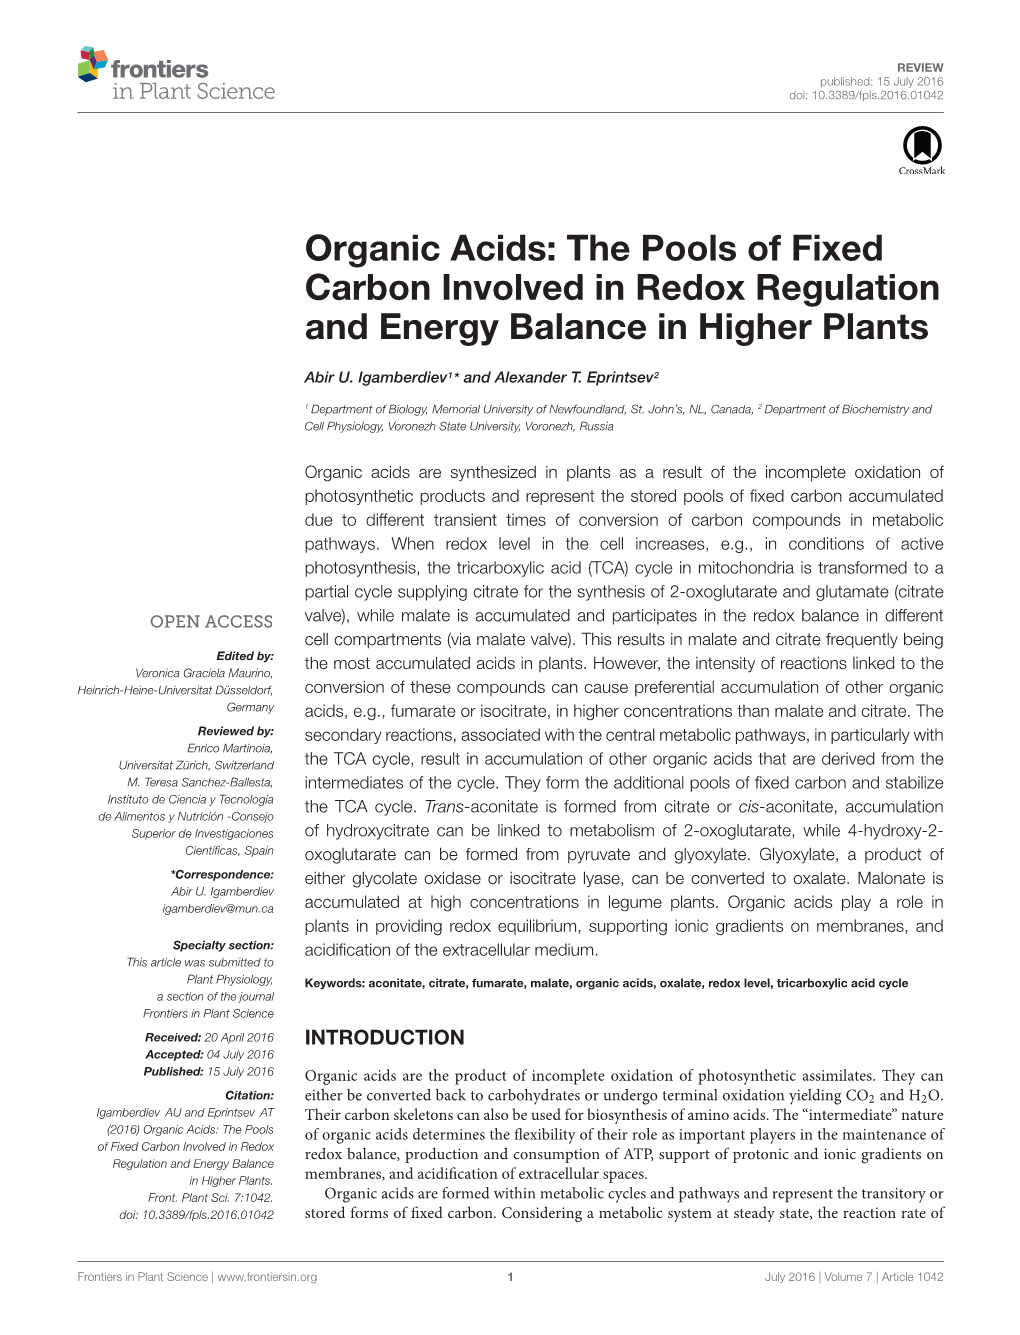 Organic Acids: the Pools of Fixed Carbon Involved in Redox Regulation and Energy Balance in Higher Plants